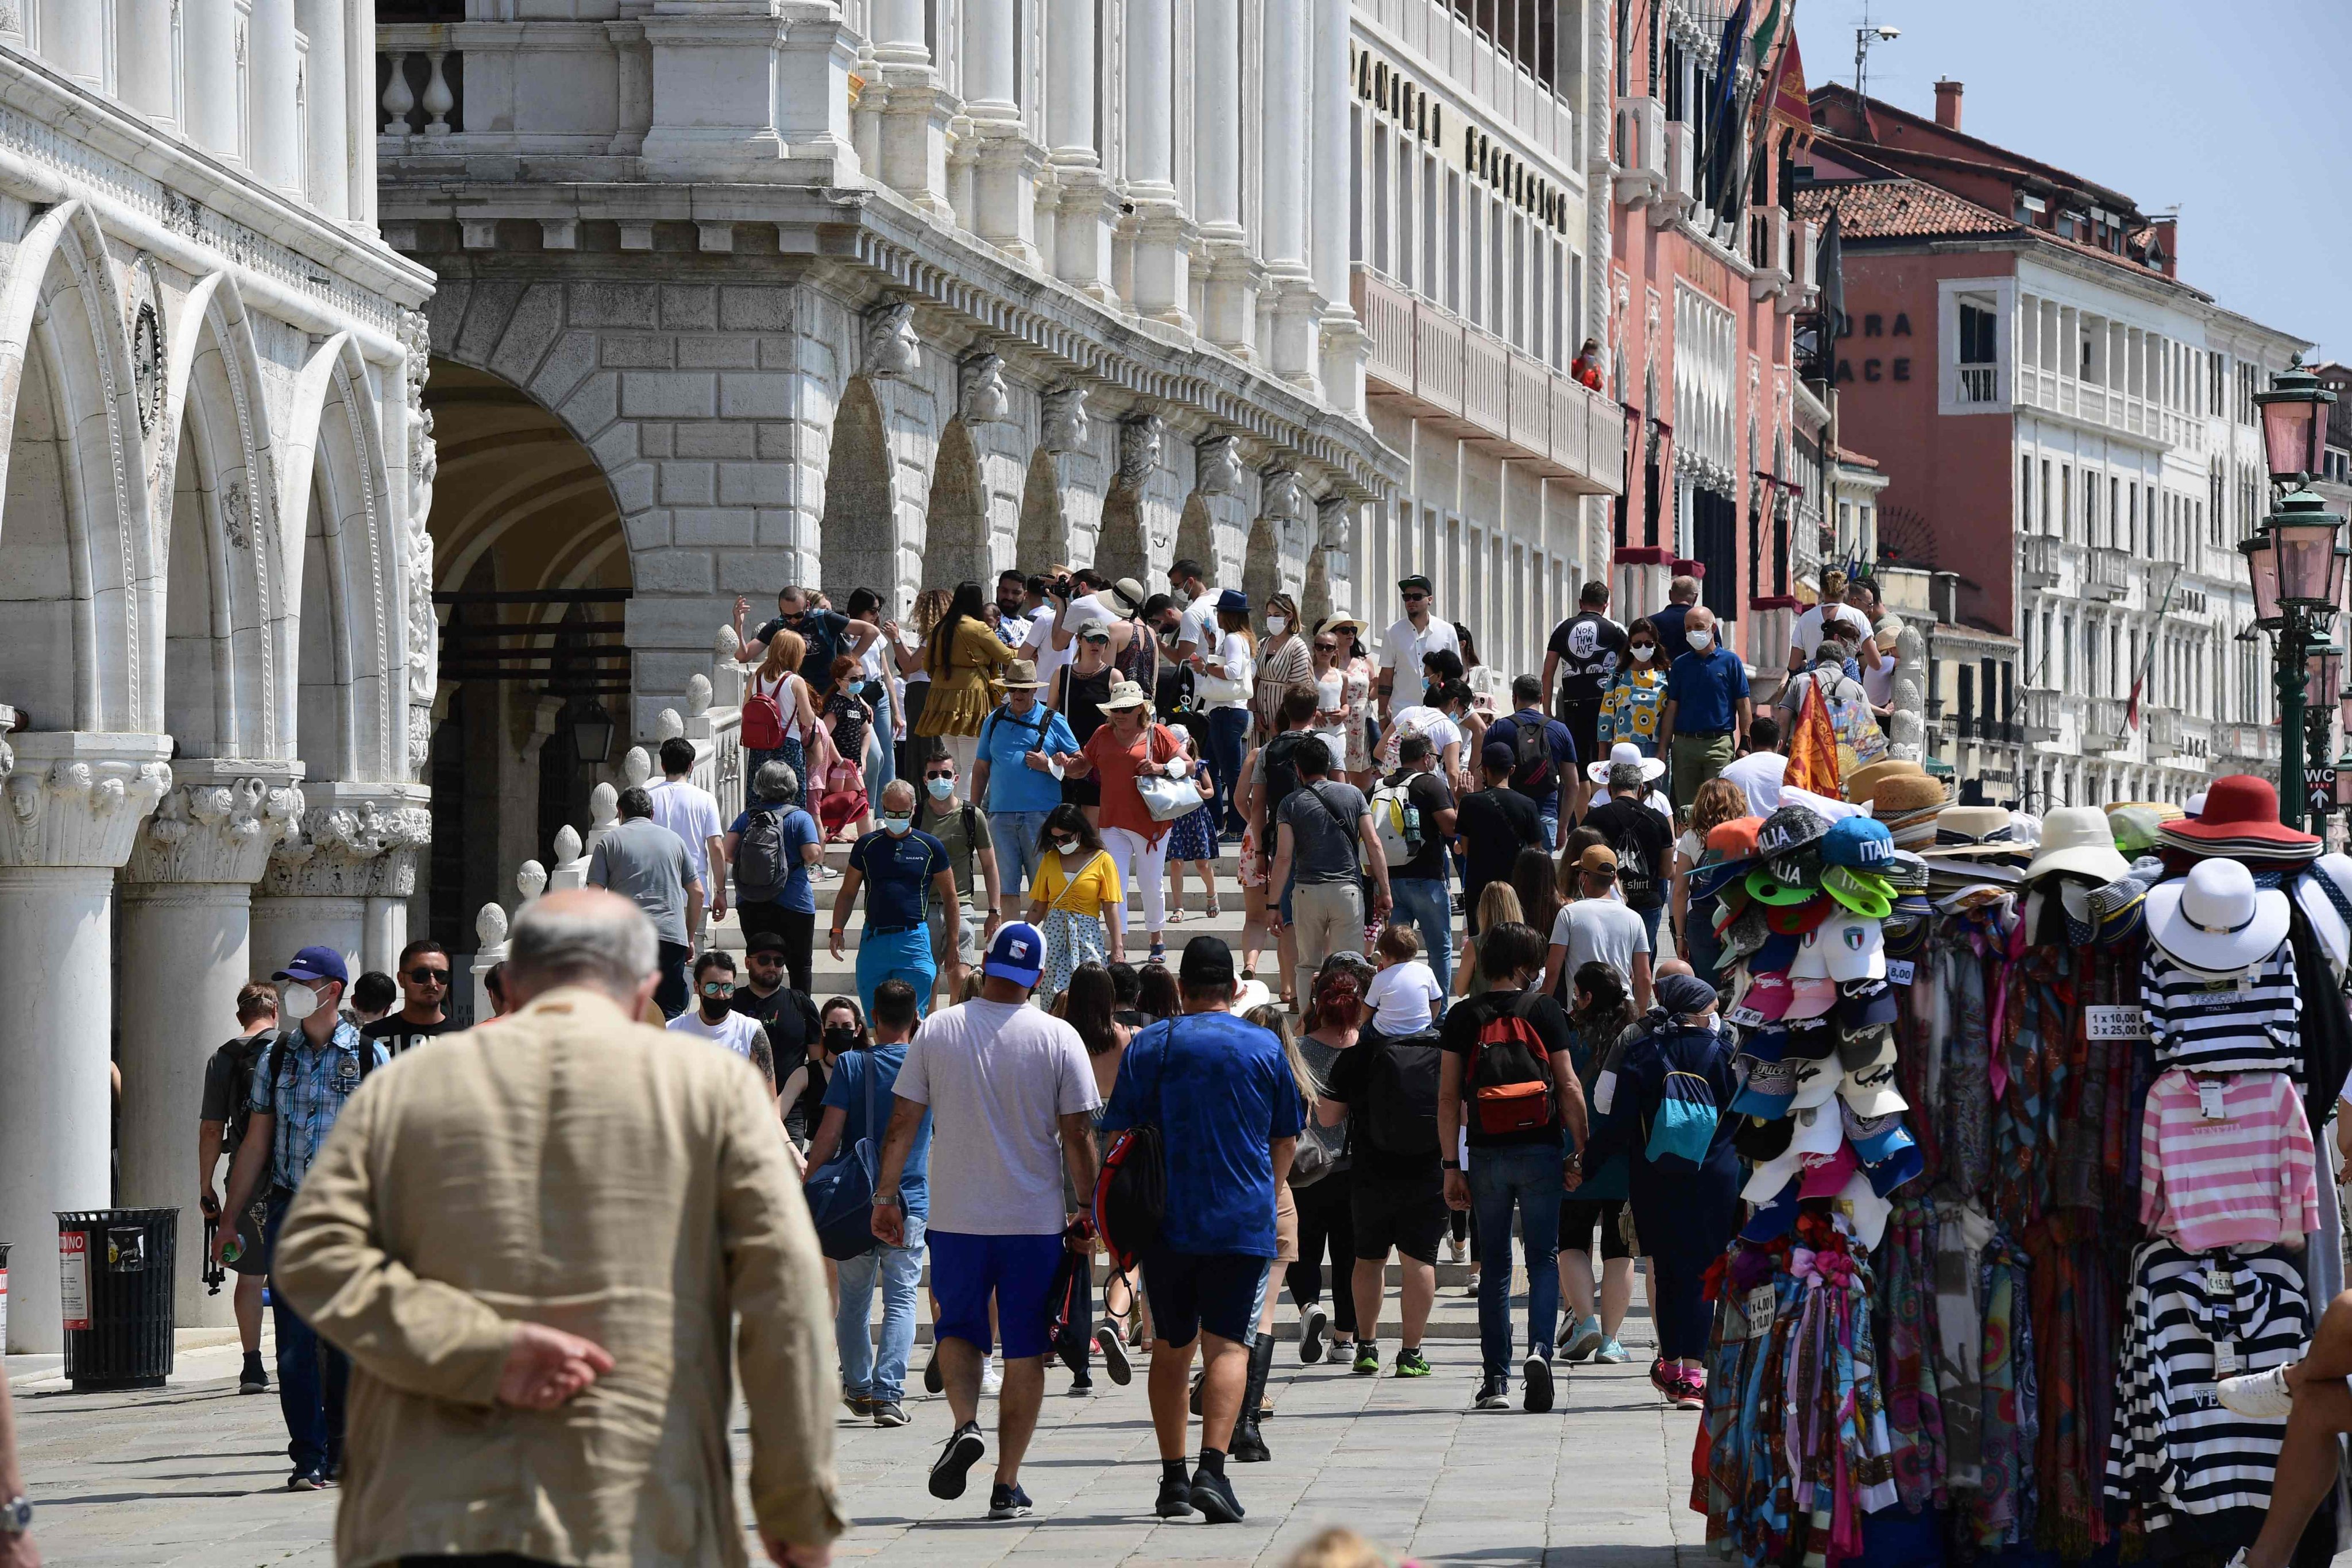 Venice has started issuing day tickets for tourists to reduce overtourism. The US$5.50 tickets are available online, and visitors caught without a permit could face a fine of €50 to €300. Photo: AFP